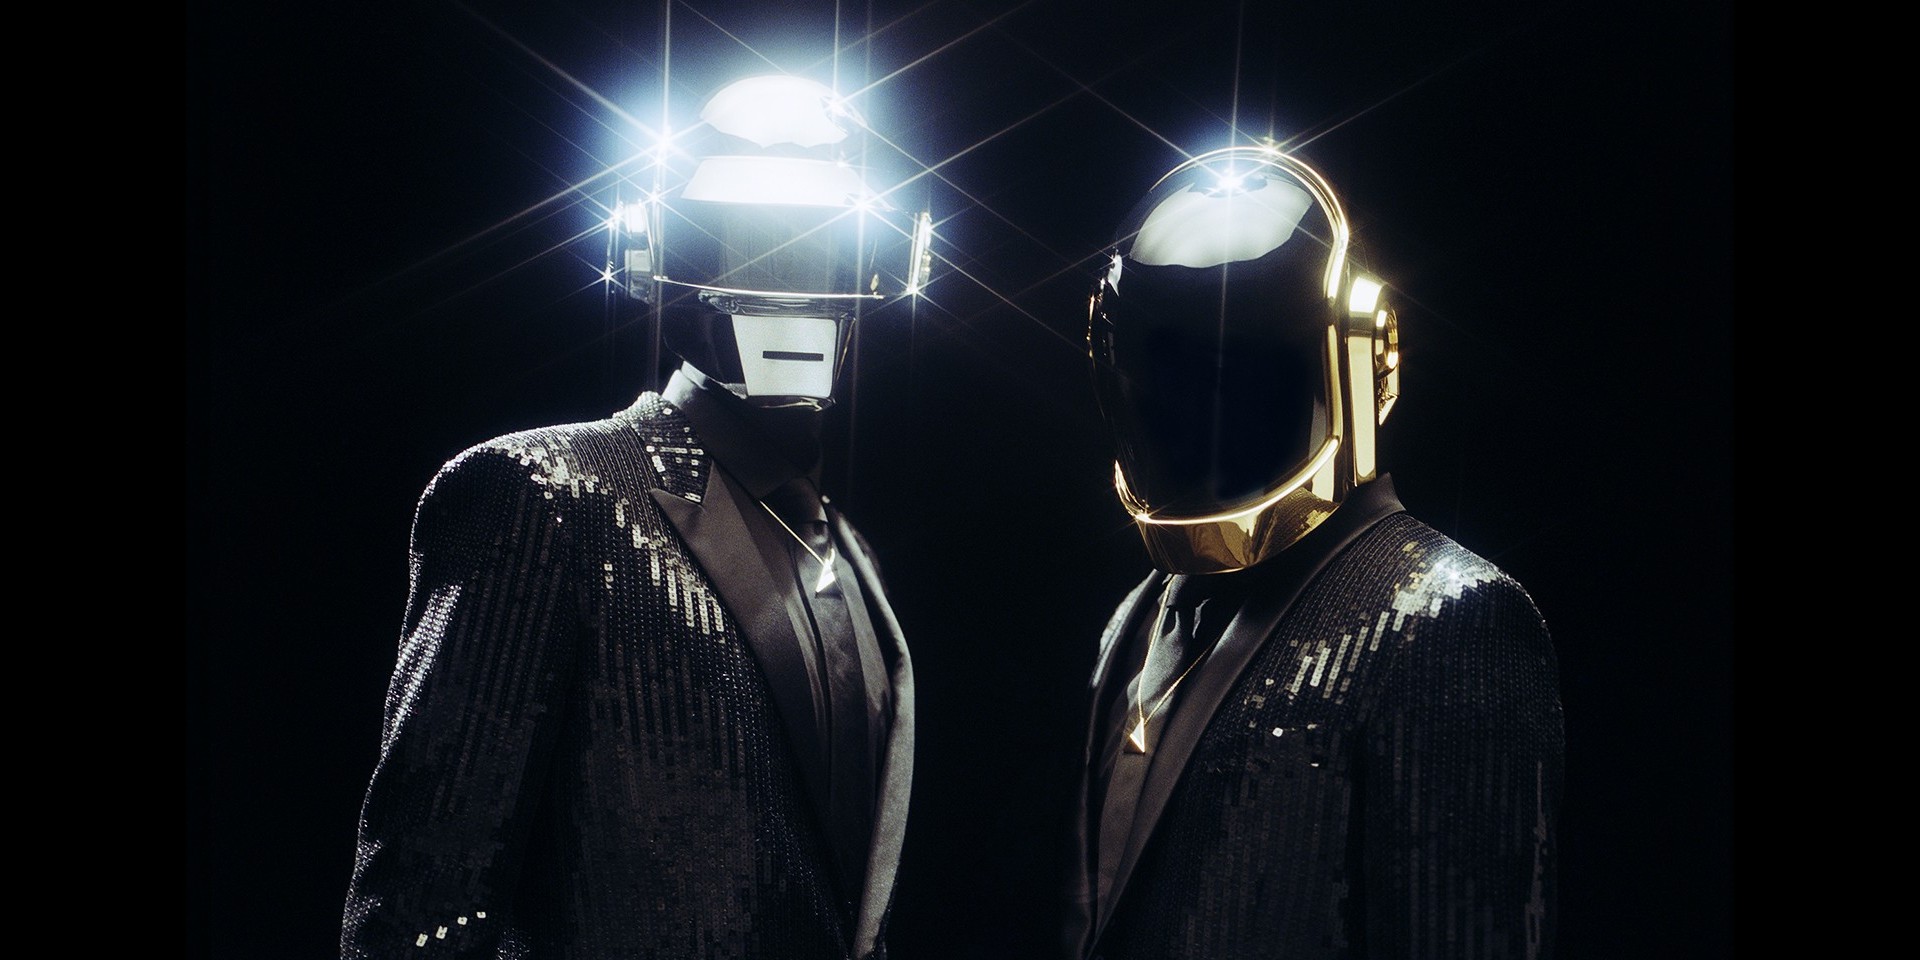 Daft Punk split up after 28 years: musicians and artists react